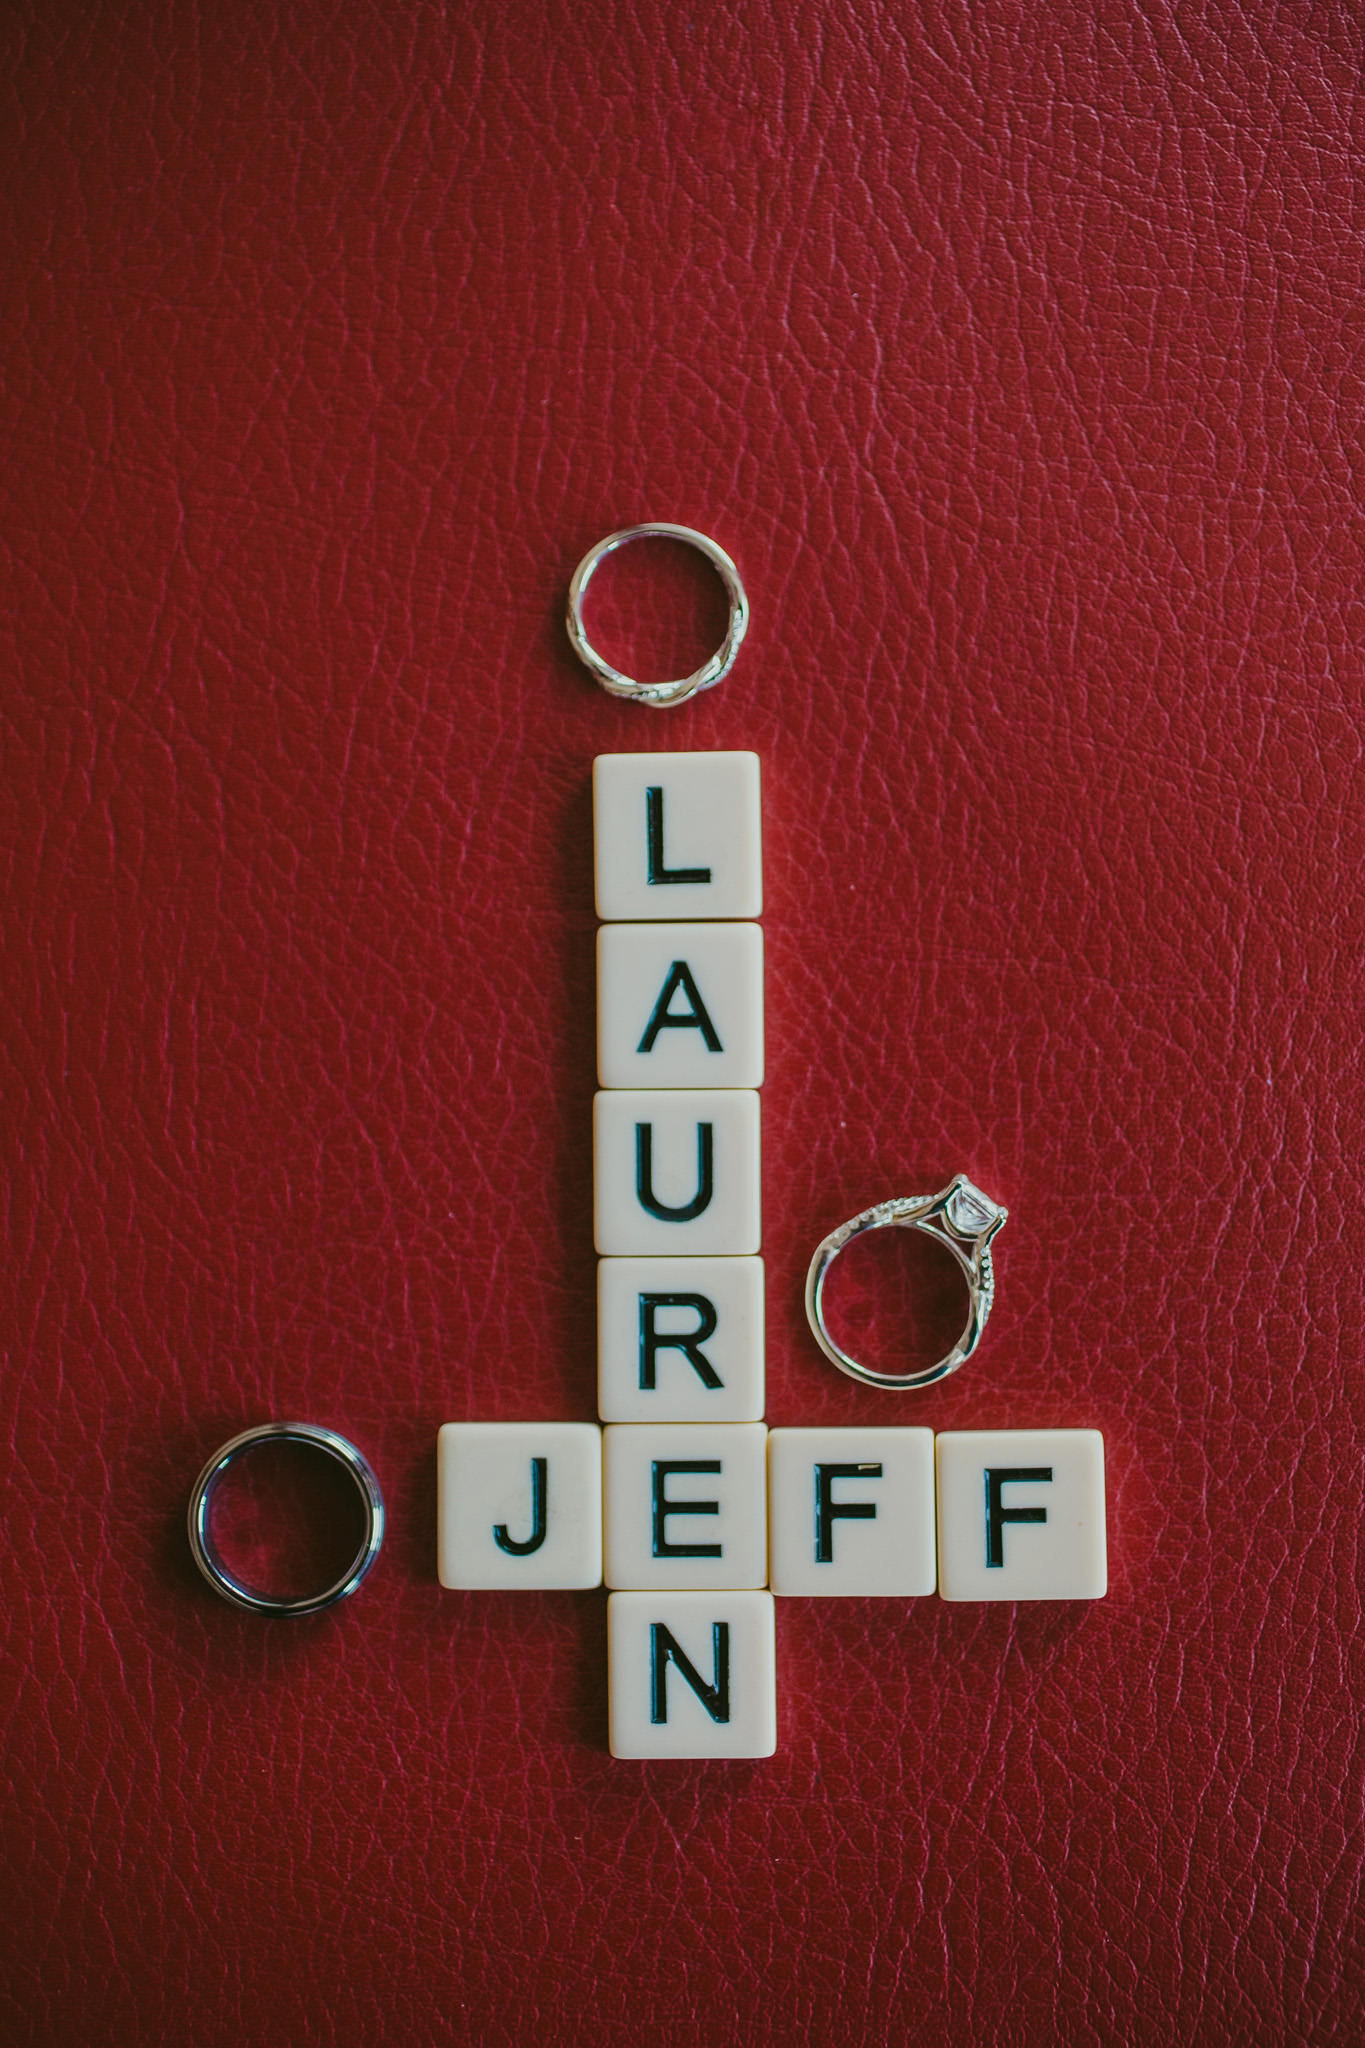 Scabble pieces that say Lauren & Jeff framed by wedding rings